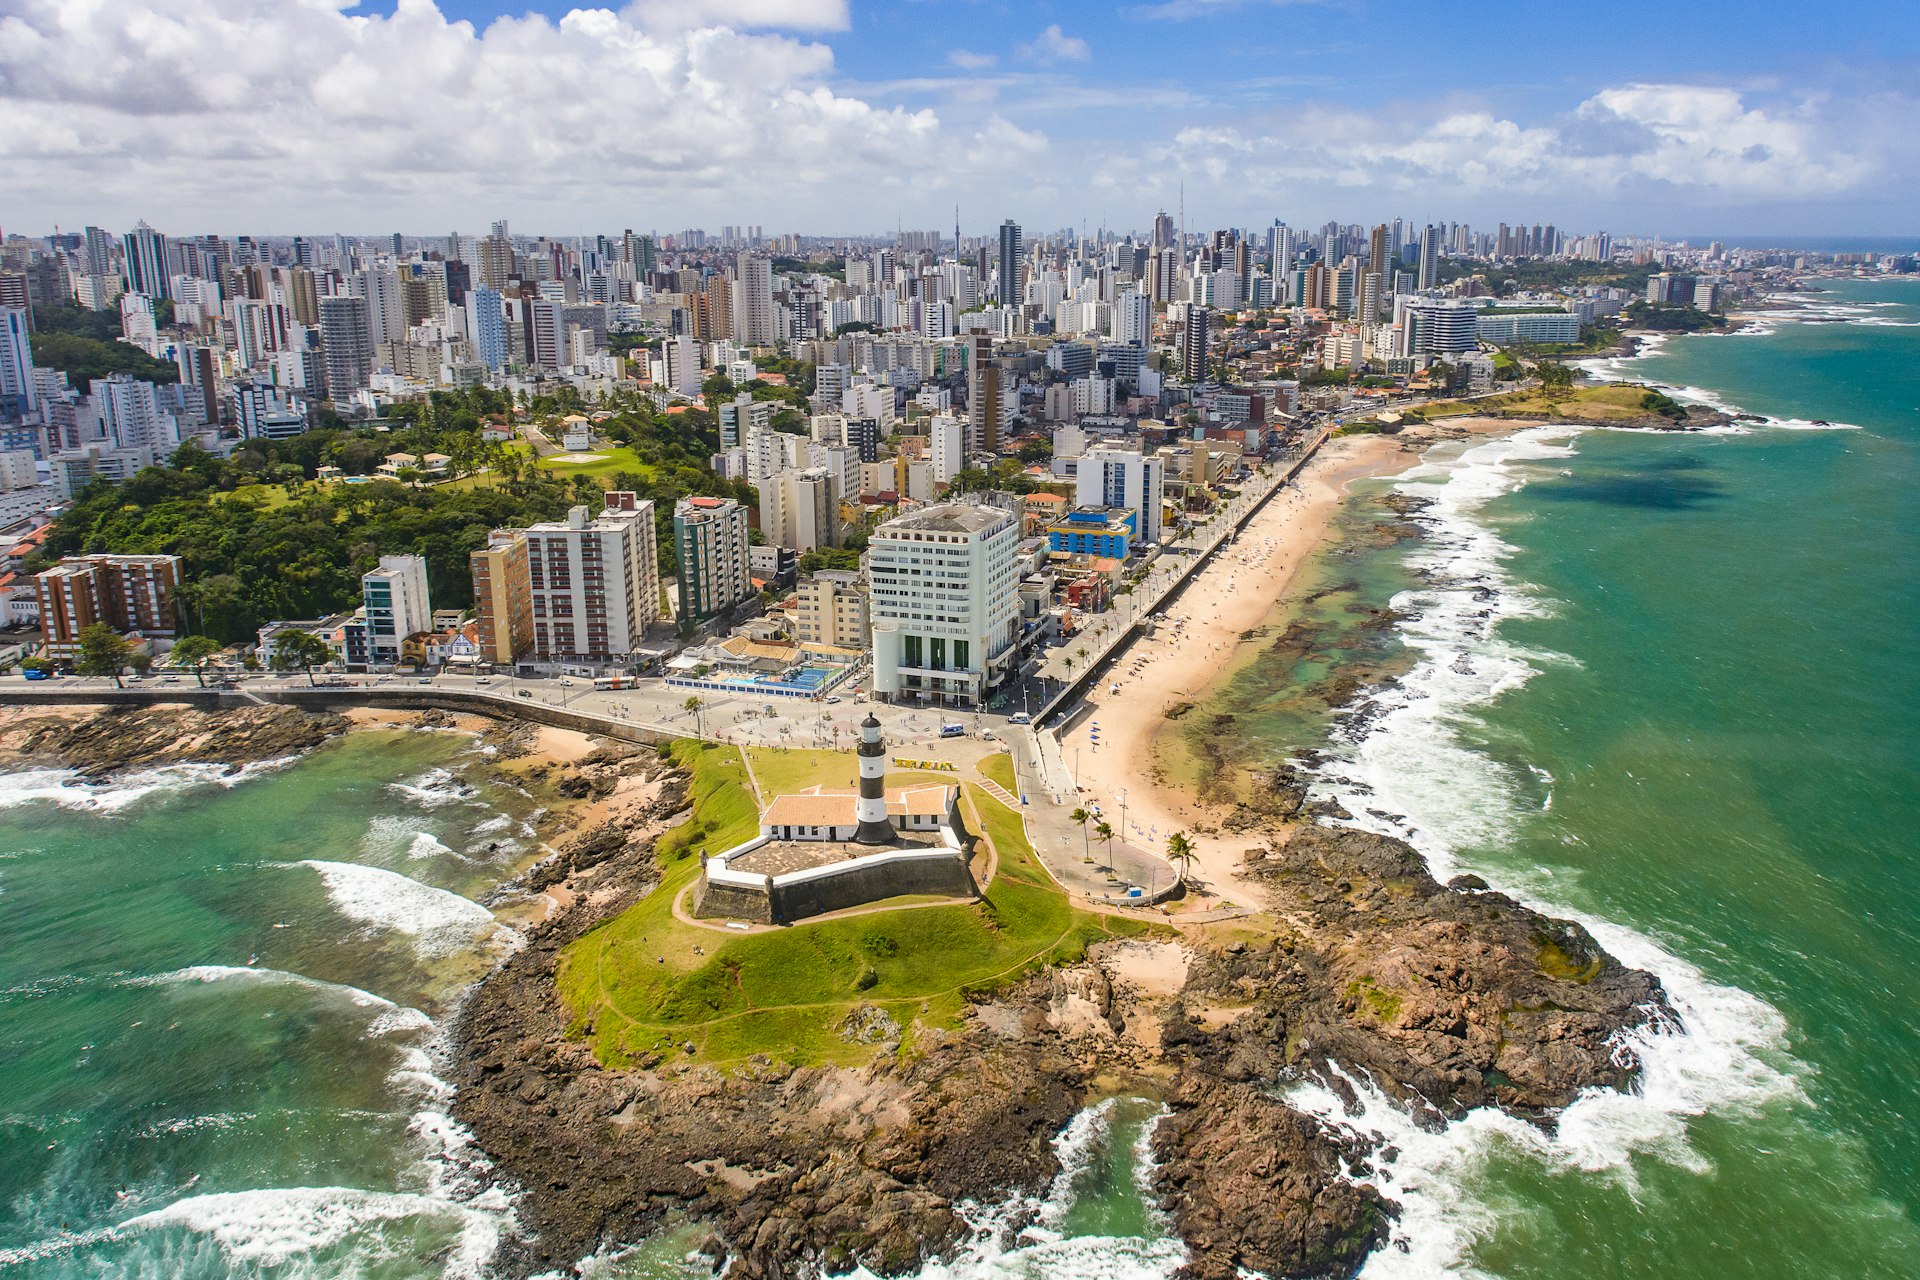 Aerial view of the Barra lighthouse in Salvador, Brazil